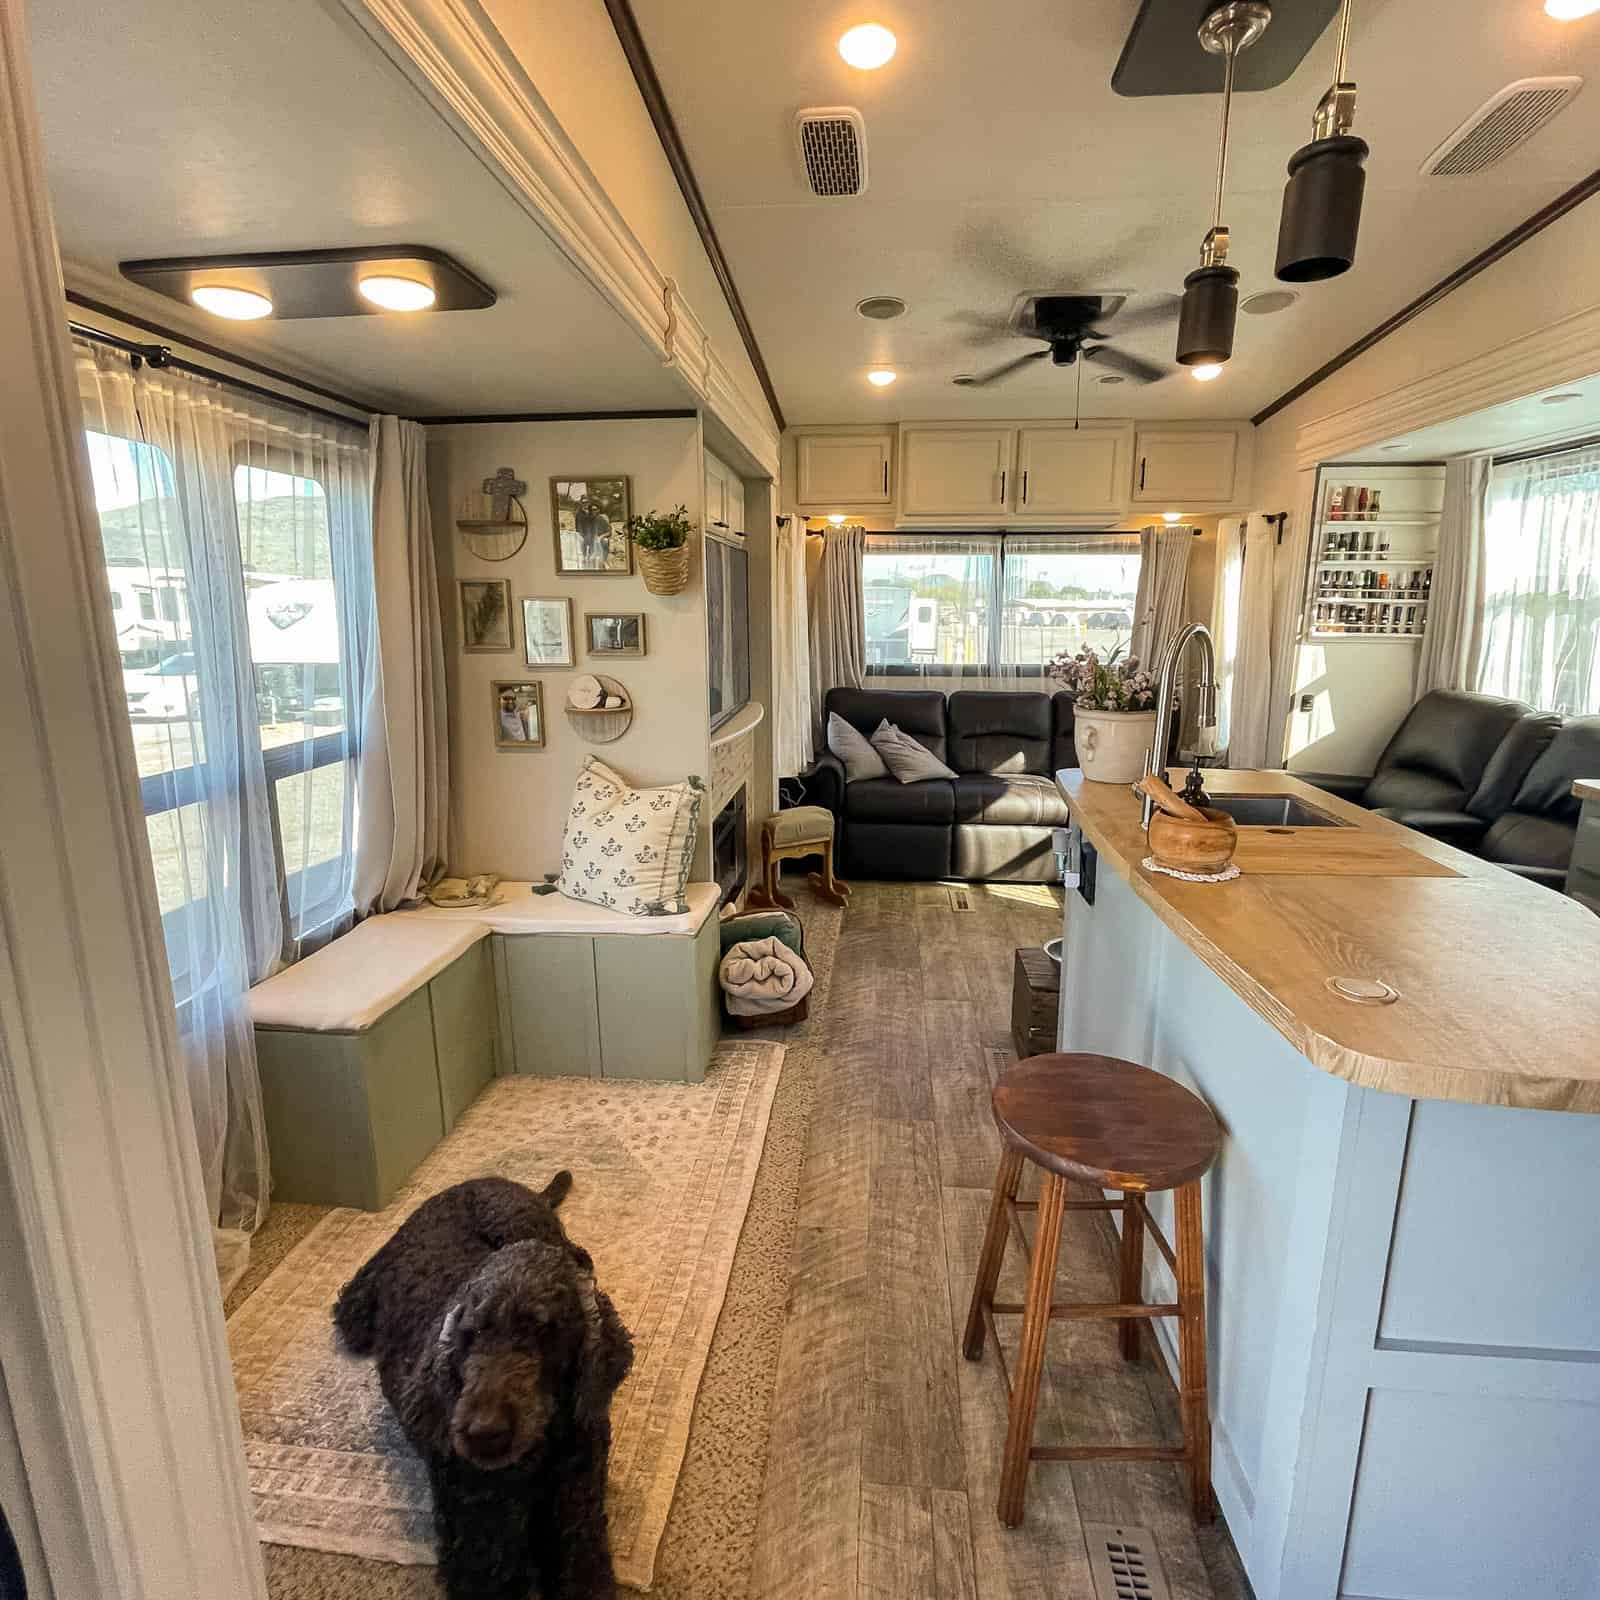 The center of the Matlock’s 2019 Jayco fifth wheel, featuring the L-shaped laundry bench on the left. (Image: Maggie Matlock)